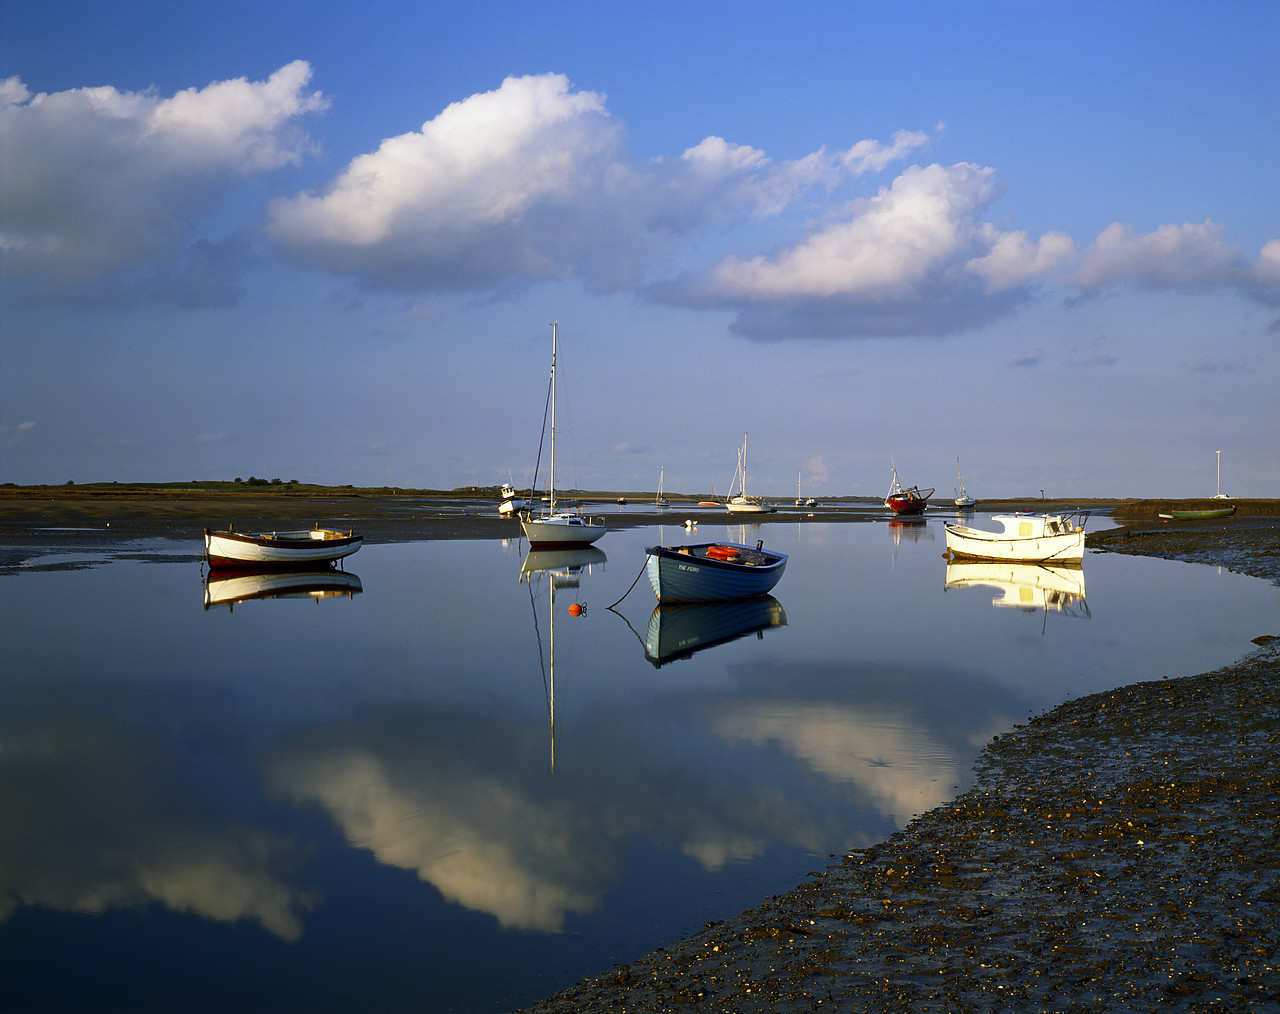 #902728 - Boat Reflections, Brancaster Staithe, Norfolk, England